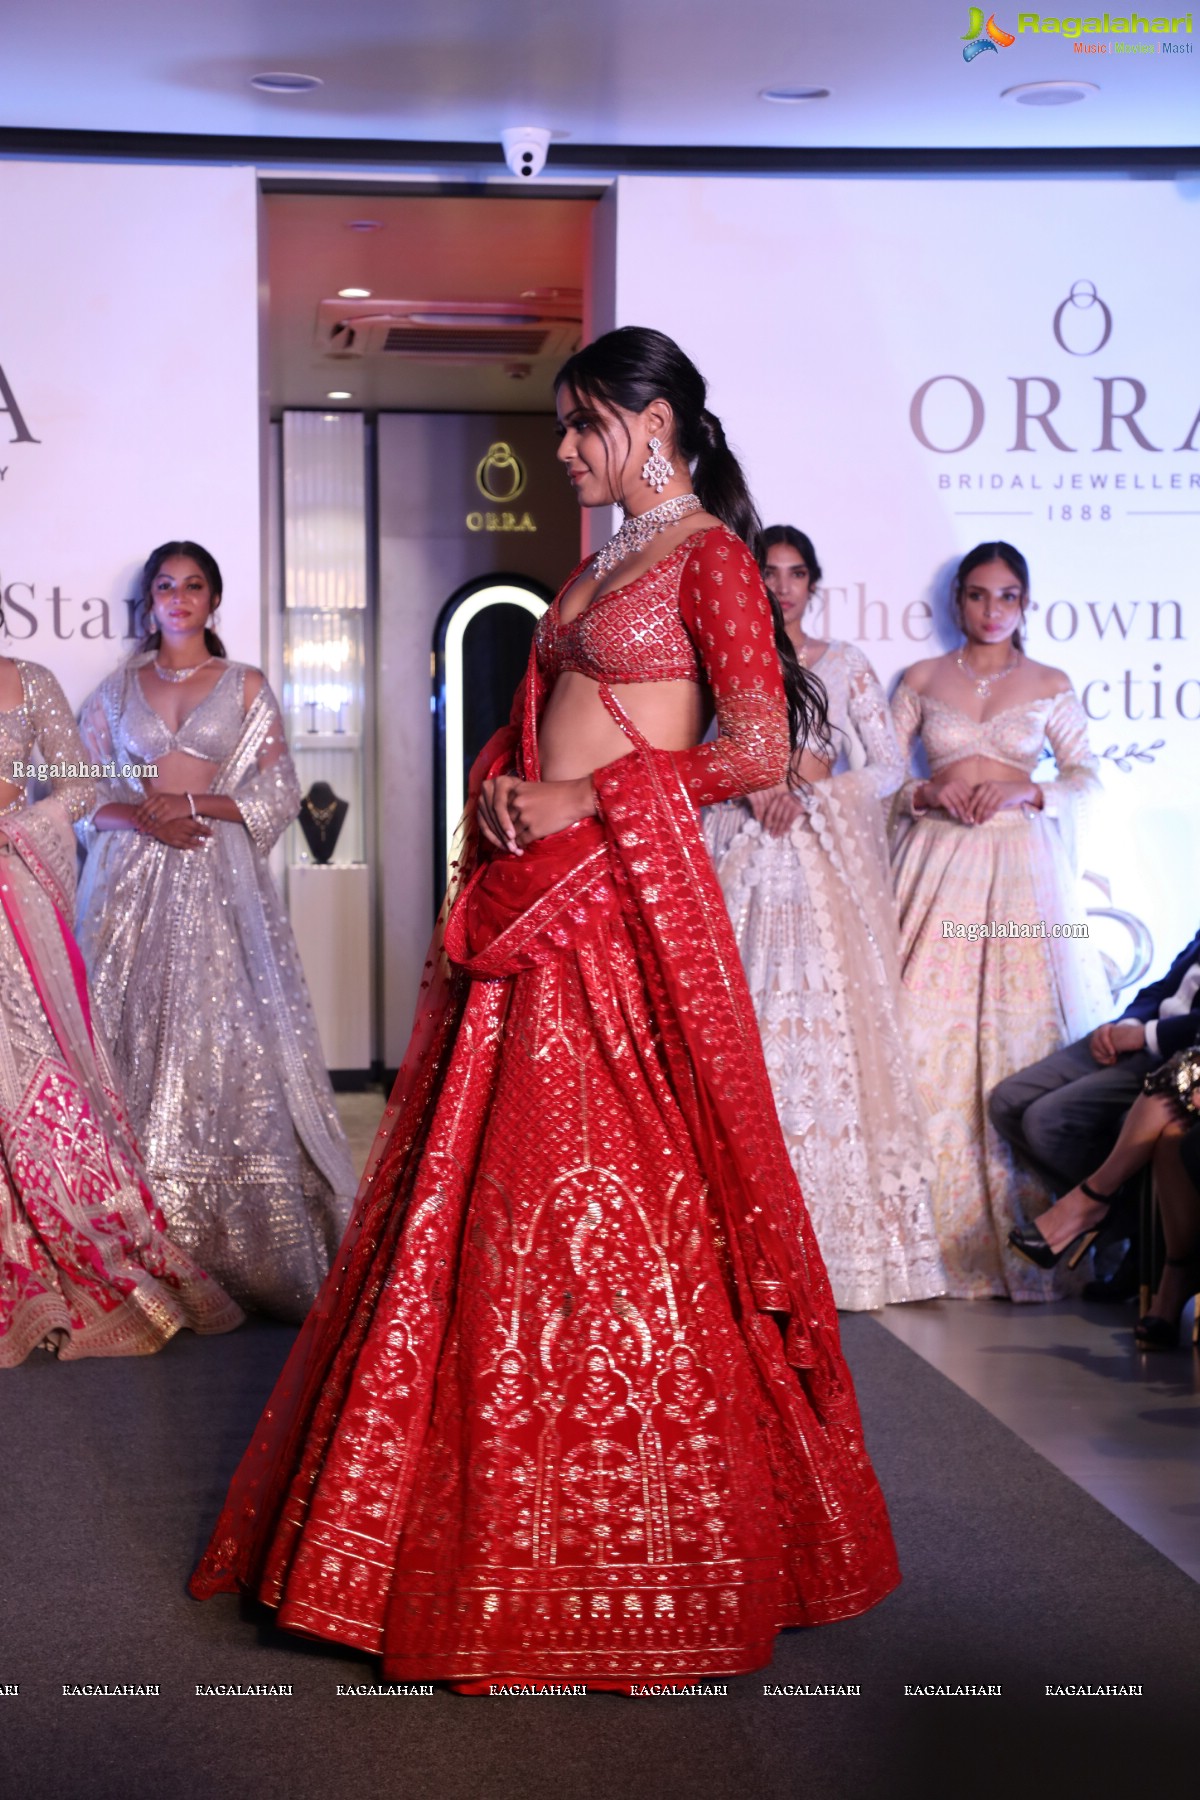 ORRA Bridal Jewellery Launches The Crown Star Collection - an Exciting New Collection